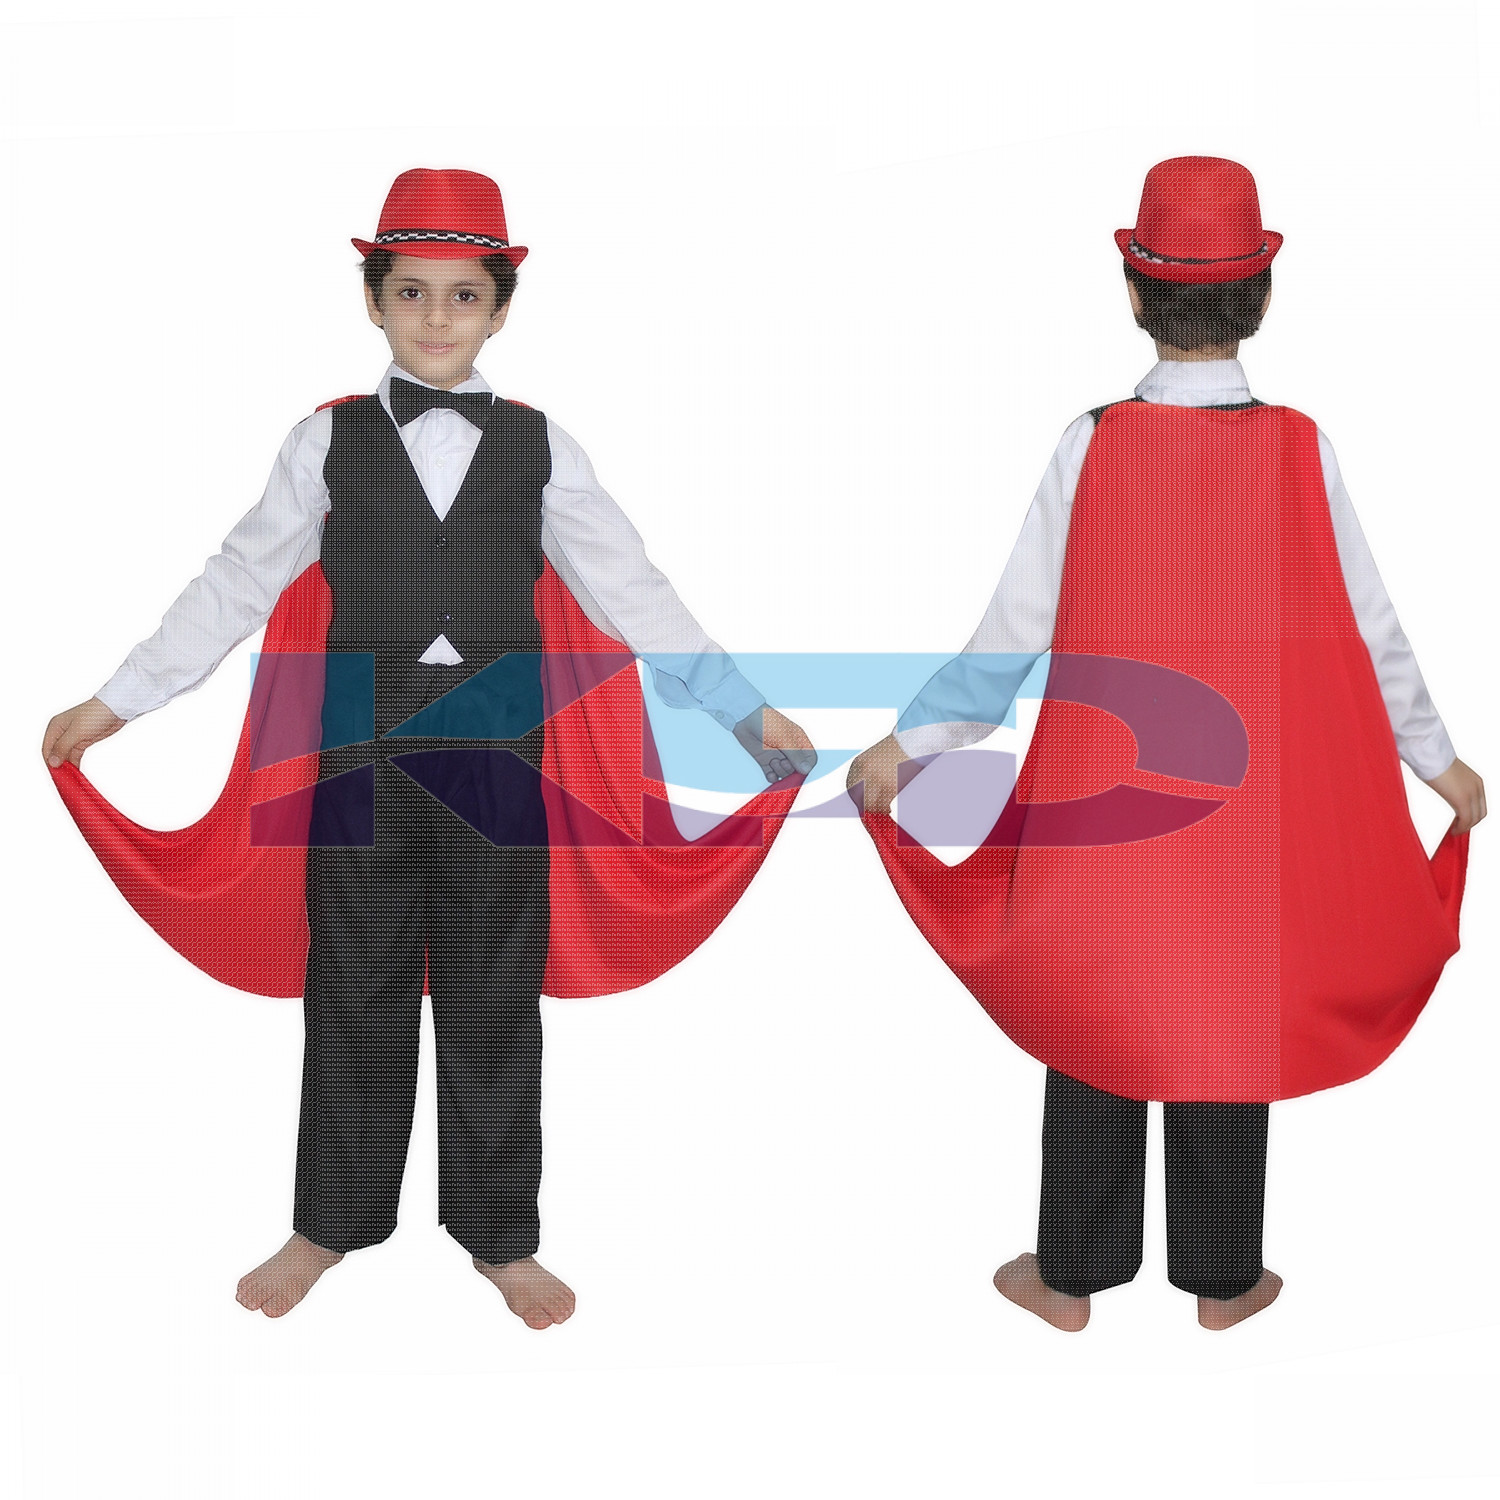 Magician Fancy dress for kids,Performer/Entertainer/Magical Shows Costume for Annual function/Theme Party/Competition/Stage Shows/Birthday Party Dress